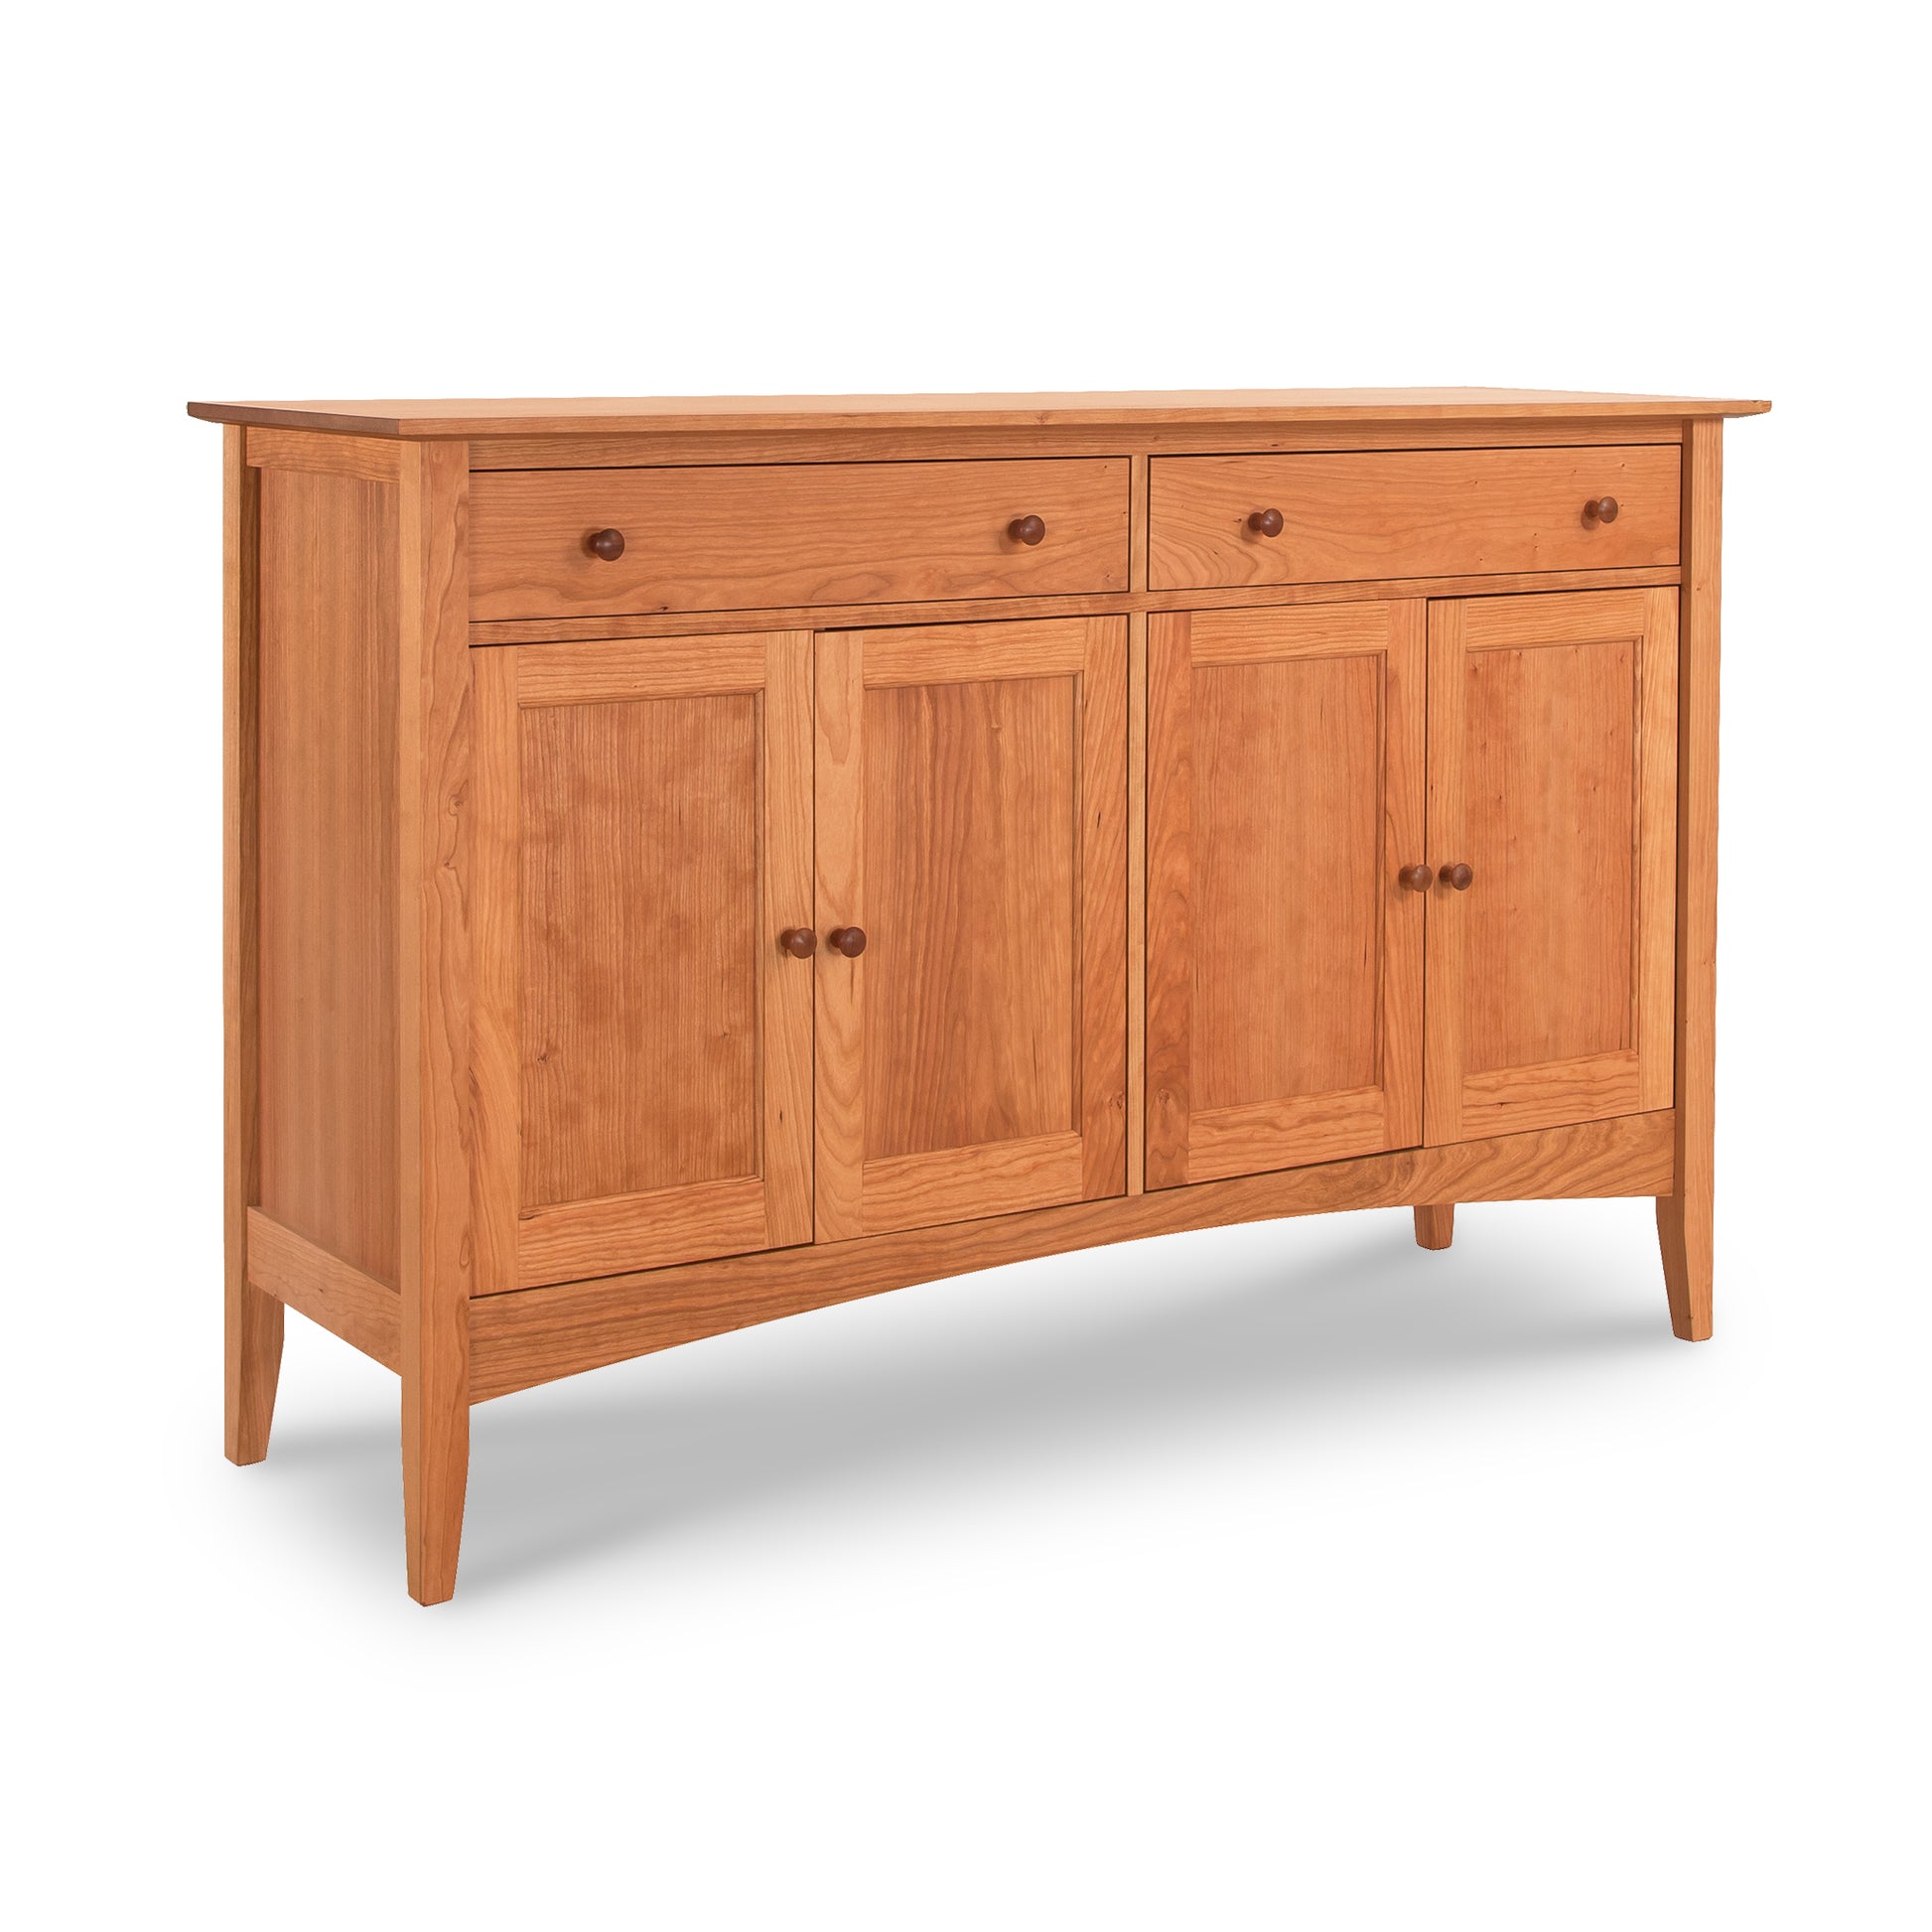 Maple Corner Woodworks American Shaker large sideboard with three drawers and three doors on a white background.